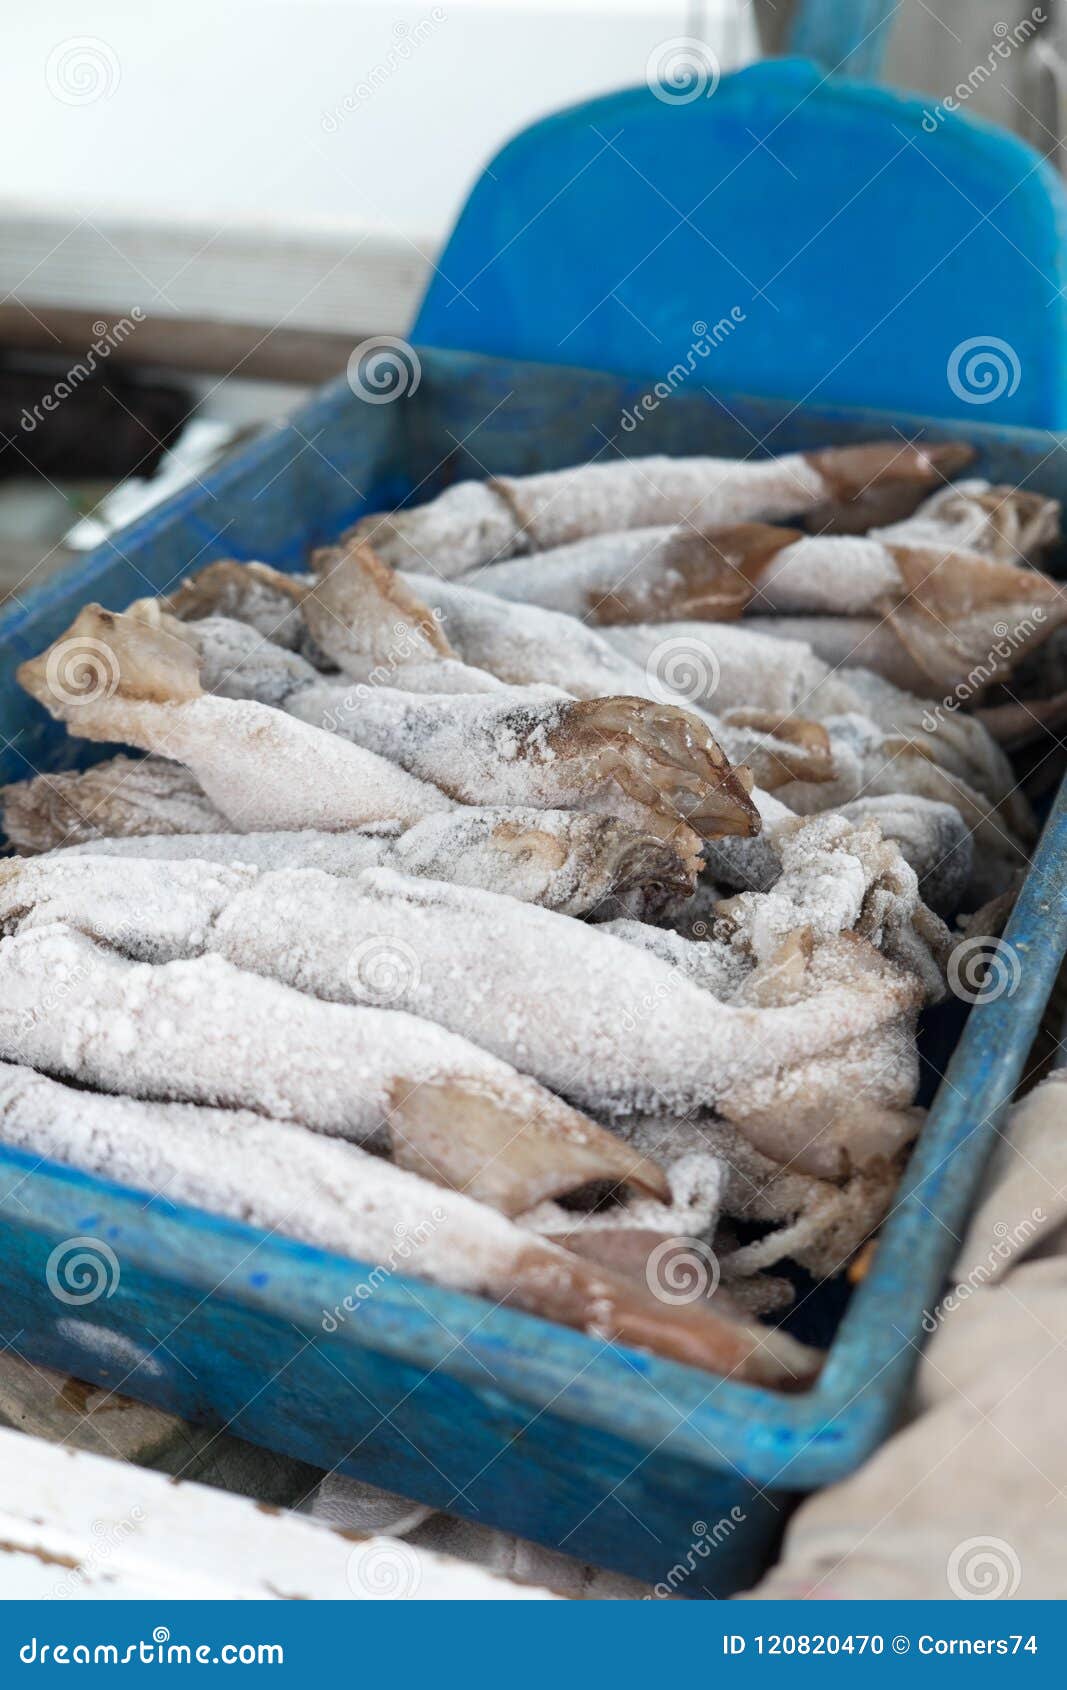 Frozen Squid for Fishing Bait Thawing in a Tray with Shallow Depth